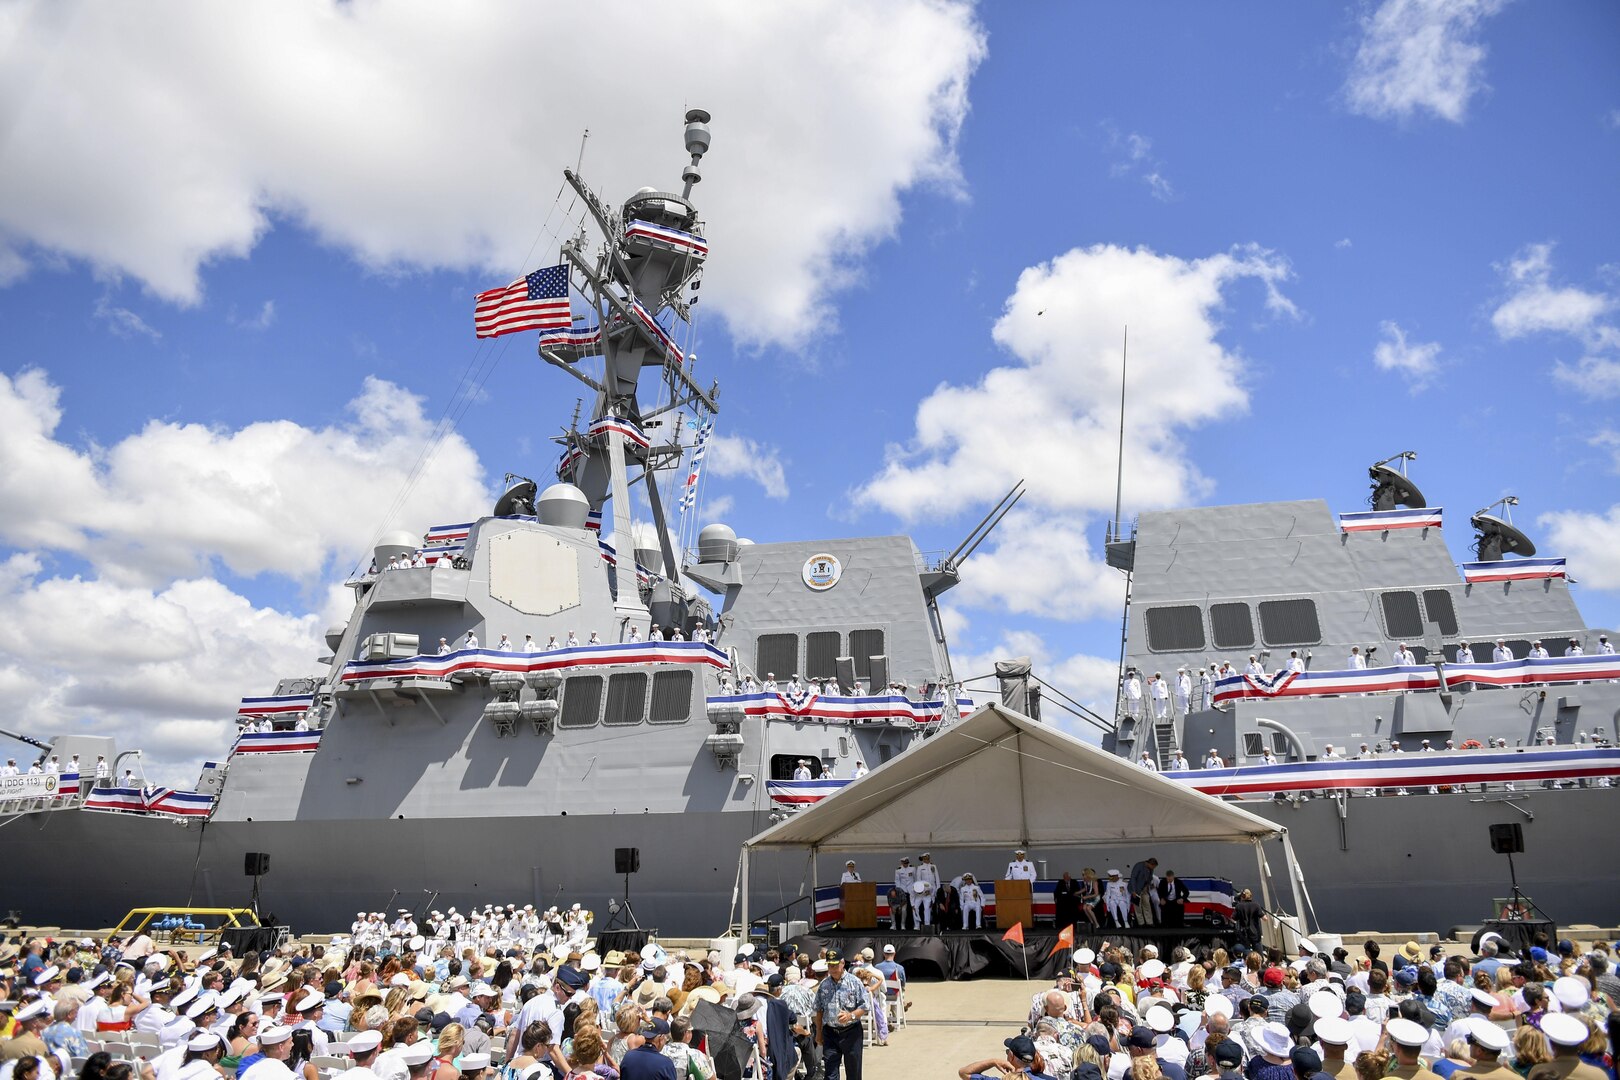 170715-N-WM477-0233 -- PEARL HARBOR (July 15, 2017) The crew of the Navy's newest Arleigh Burke-class guided-missile destroyer, USS John Finn (DDG 113) brings the ship to life during its commissioning ceremony. DDG 113 is named in honor of Lt. John William Finn, who as a chief aviation ordnanceman was the first member of our armed services to earn the Medal of Honor during World War II for heroism during the attack on Pearl Harbor. (U.S. Navy Photo by Mass Communication Specialist Aiyana Paschal)